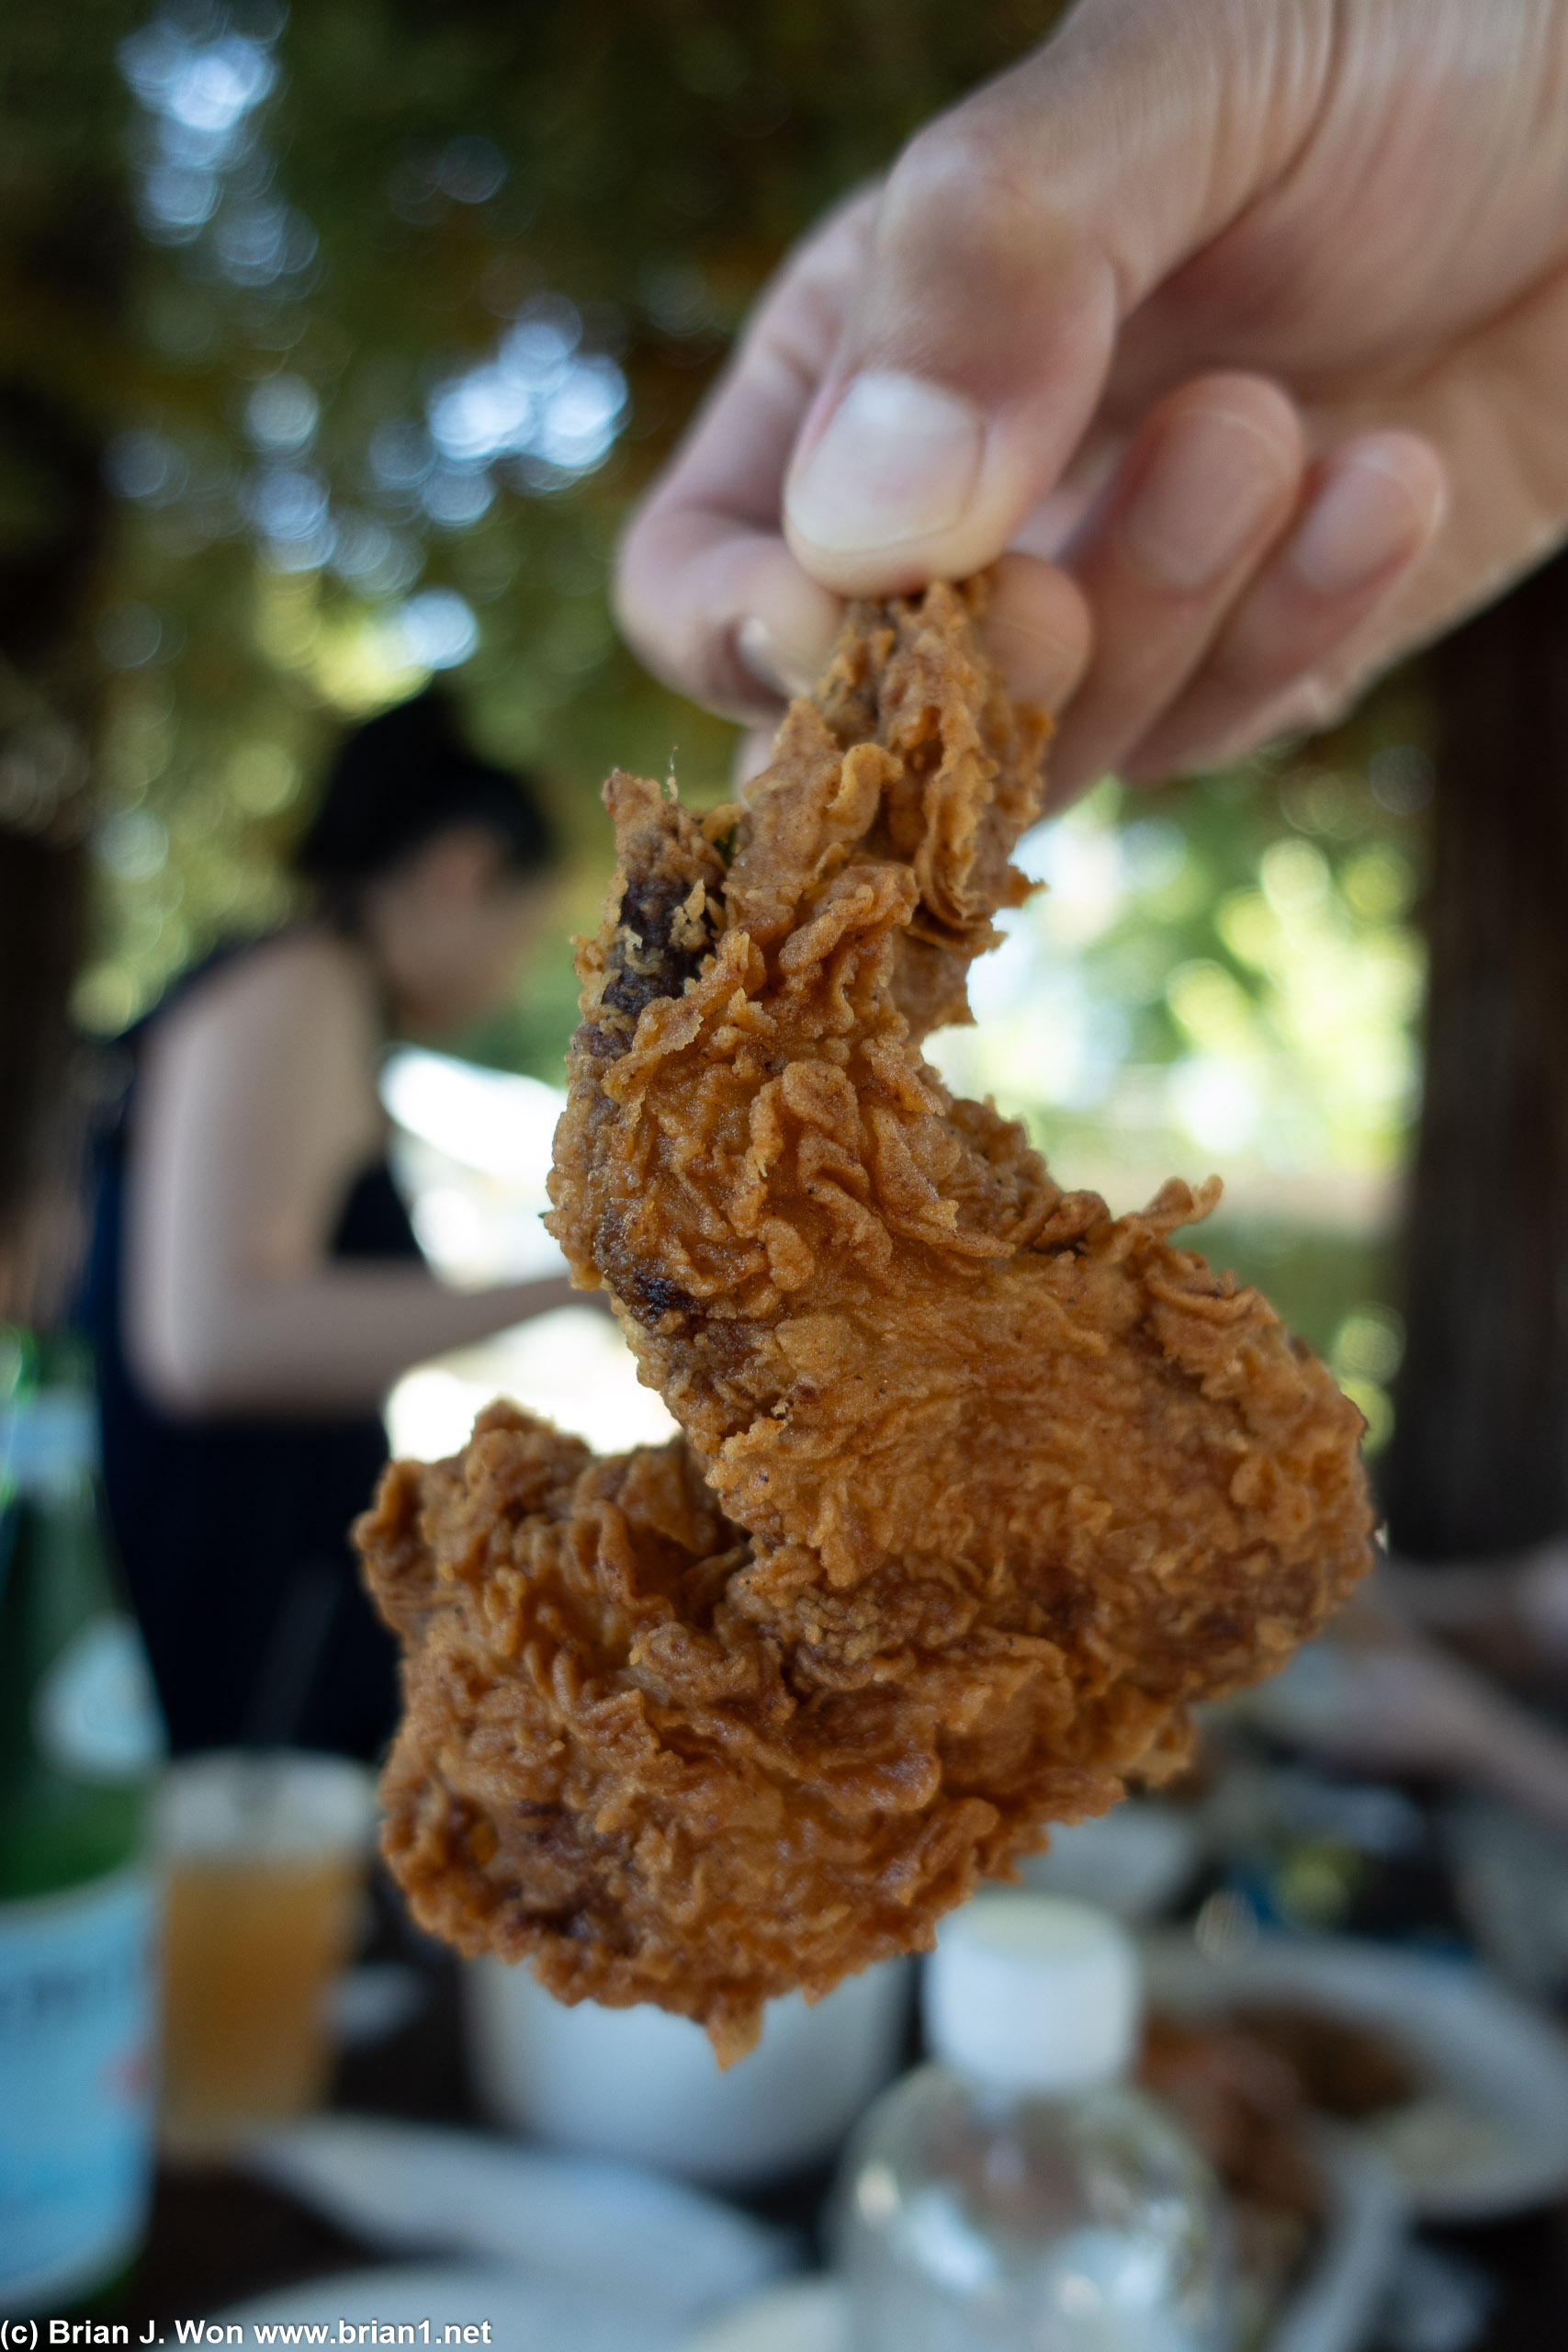 Glamour shot of the fried chicken.